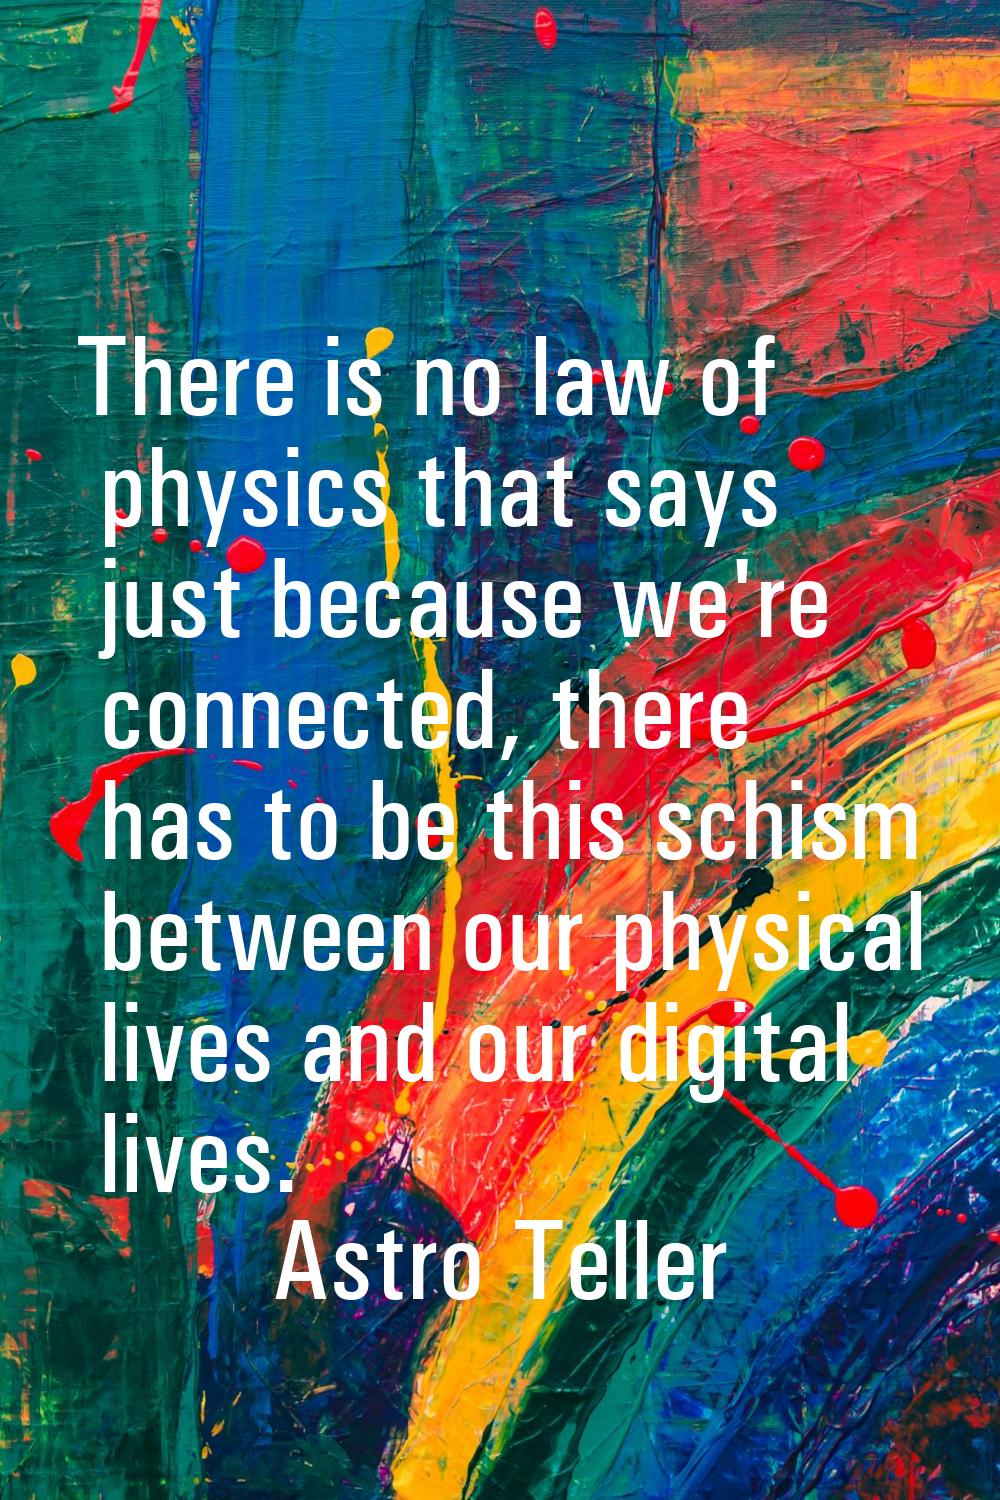 There is no law of physics that says just because we're connected, there has to be this schism betw